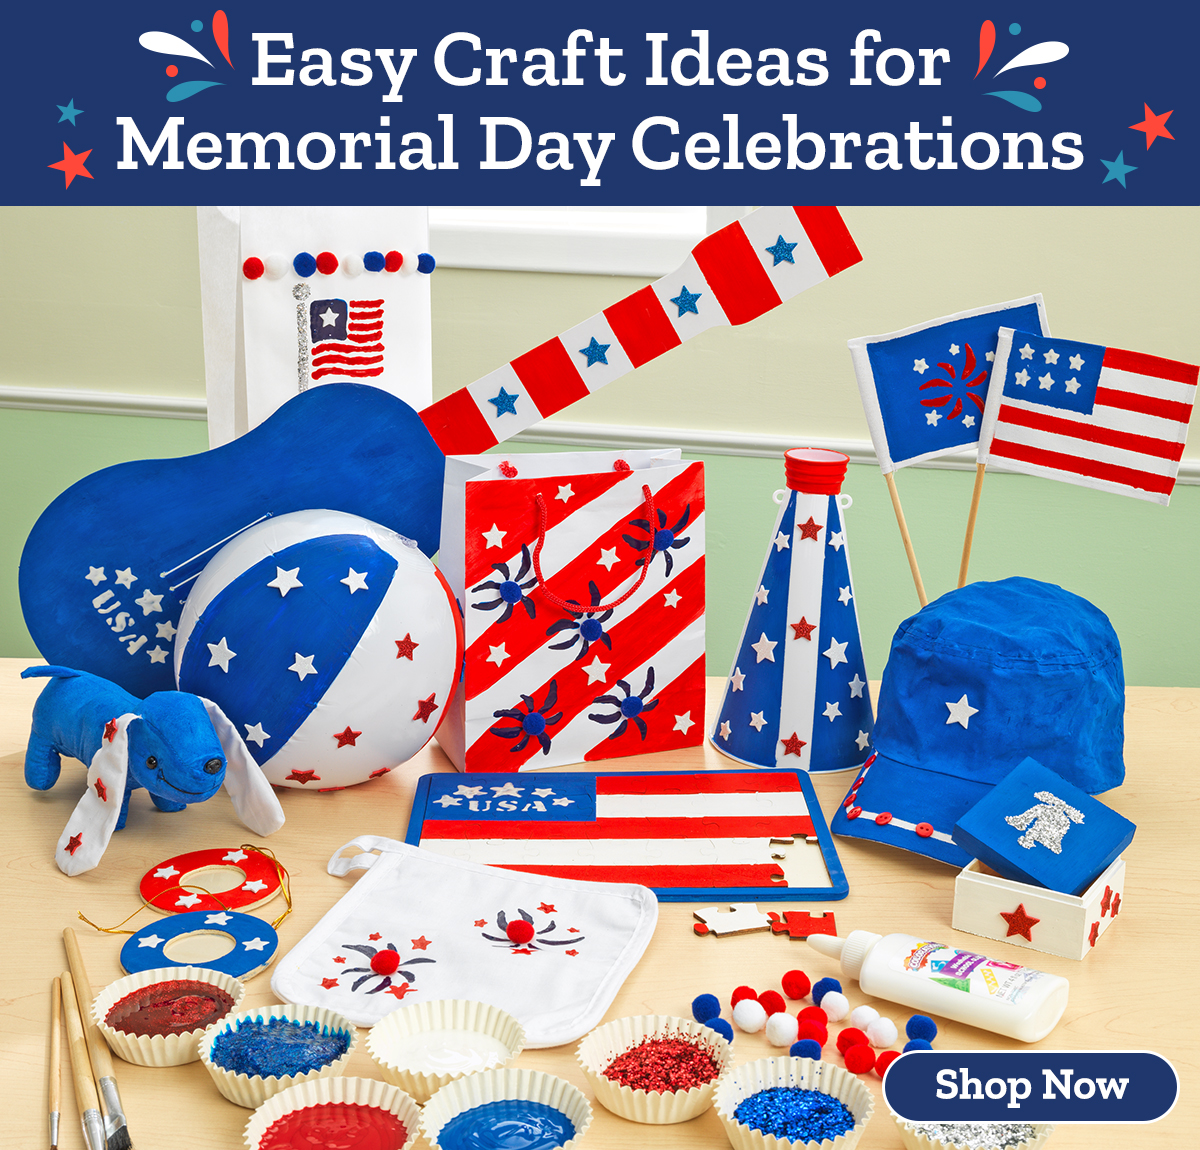 Easy craft ideas for Memorial Day Celebrations